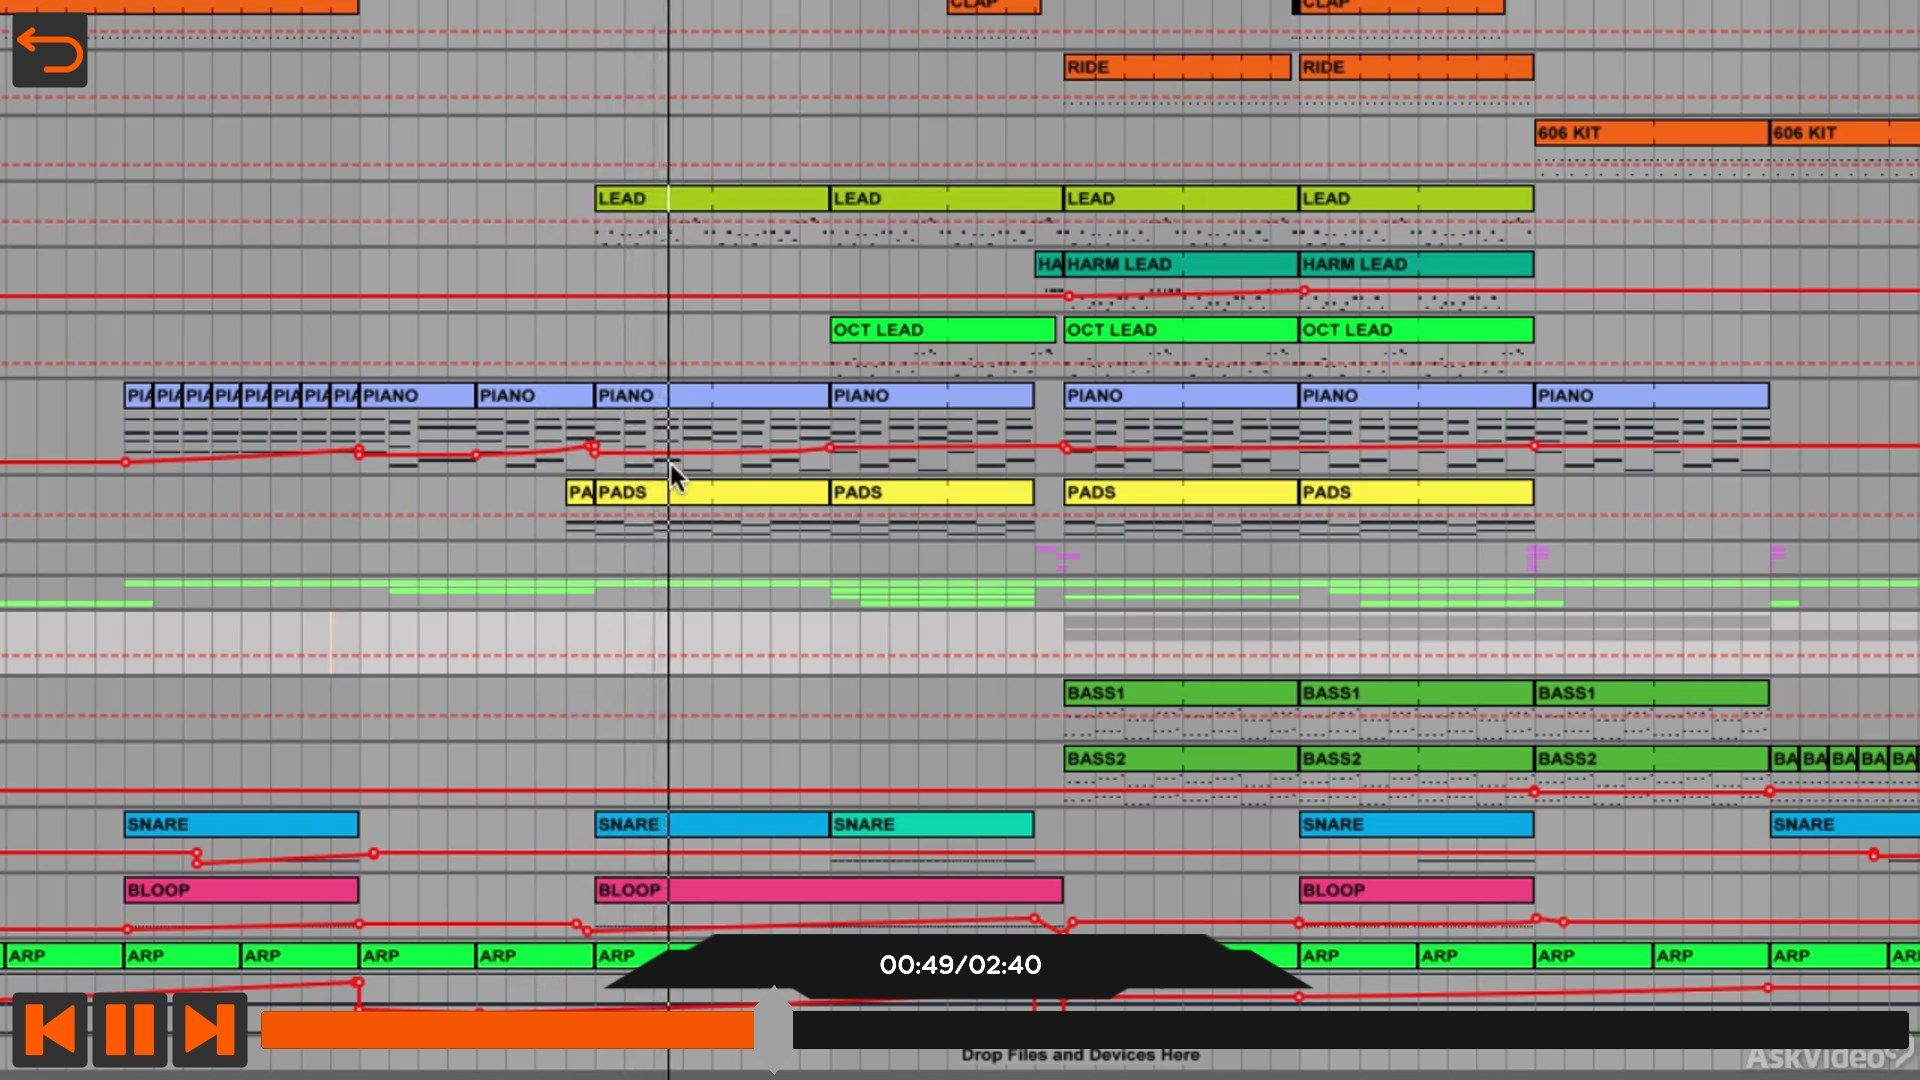 Dance Music Styles Course for Ableton Live